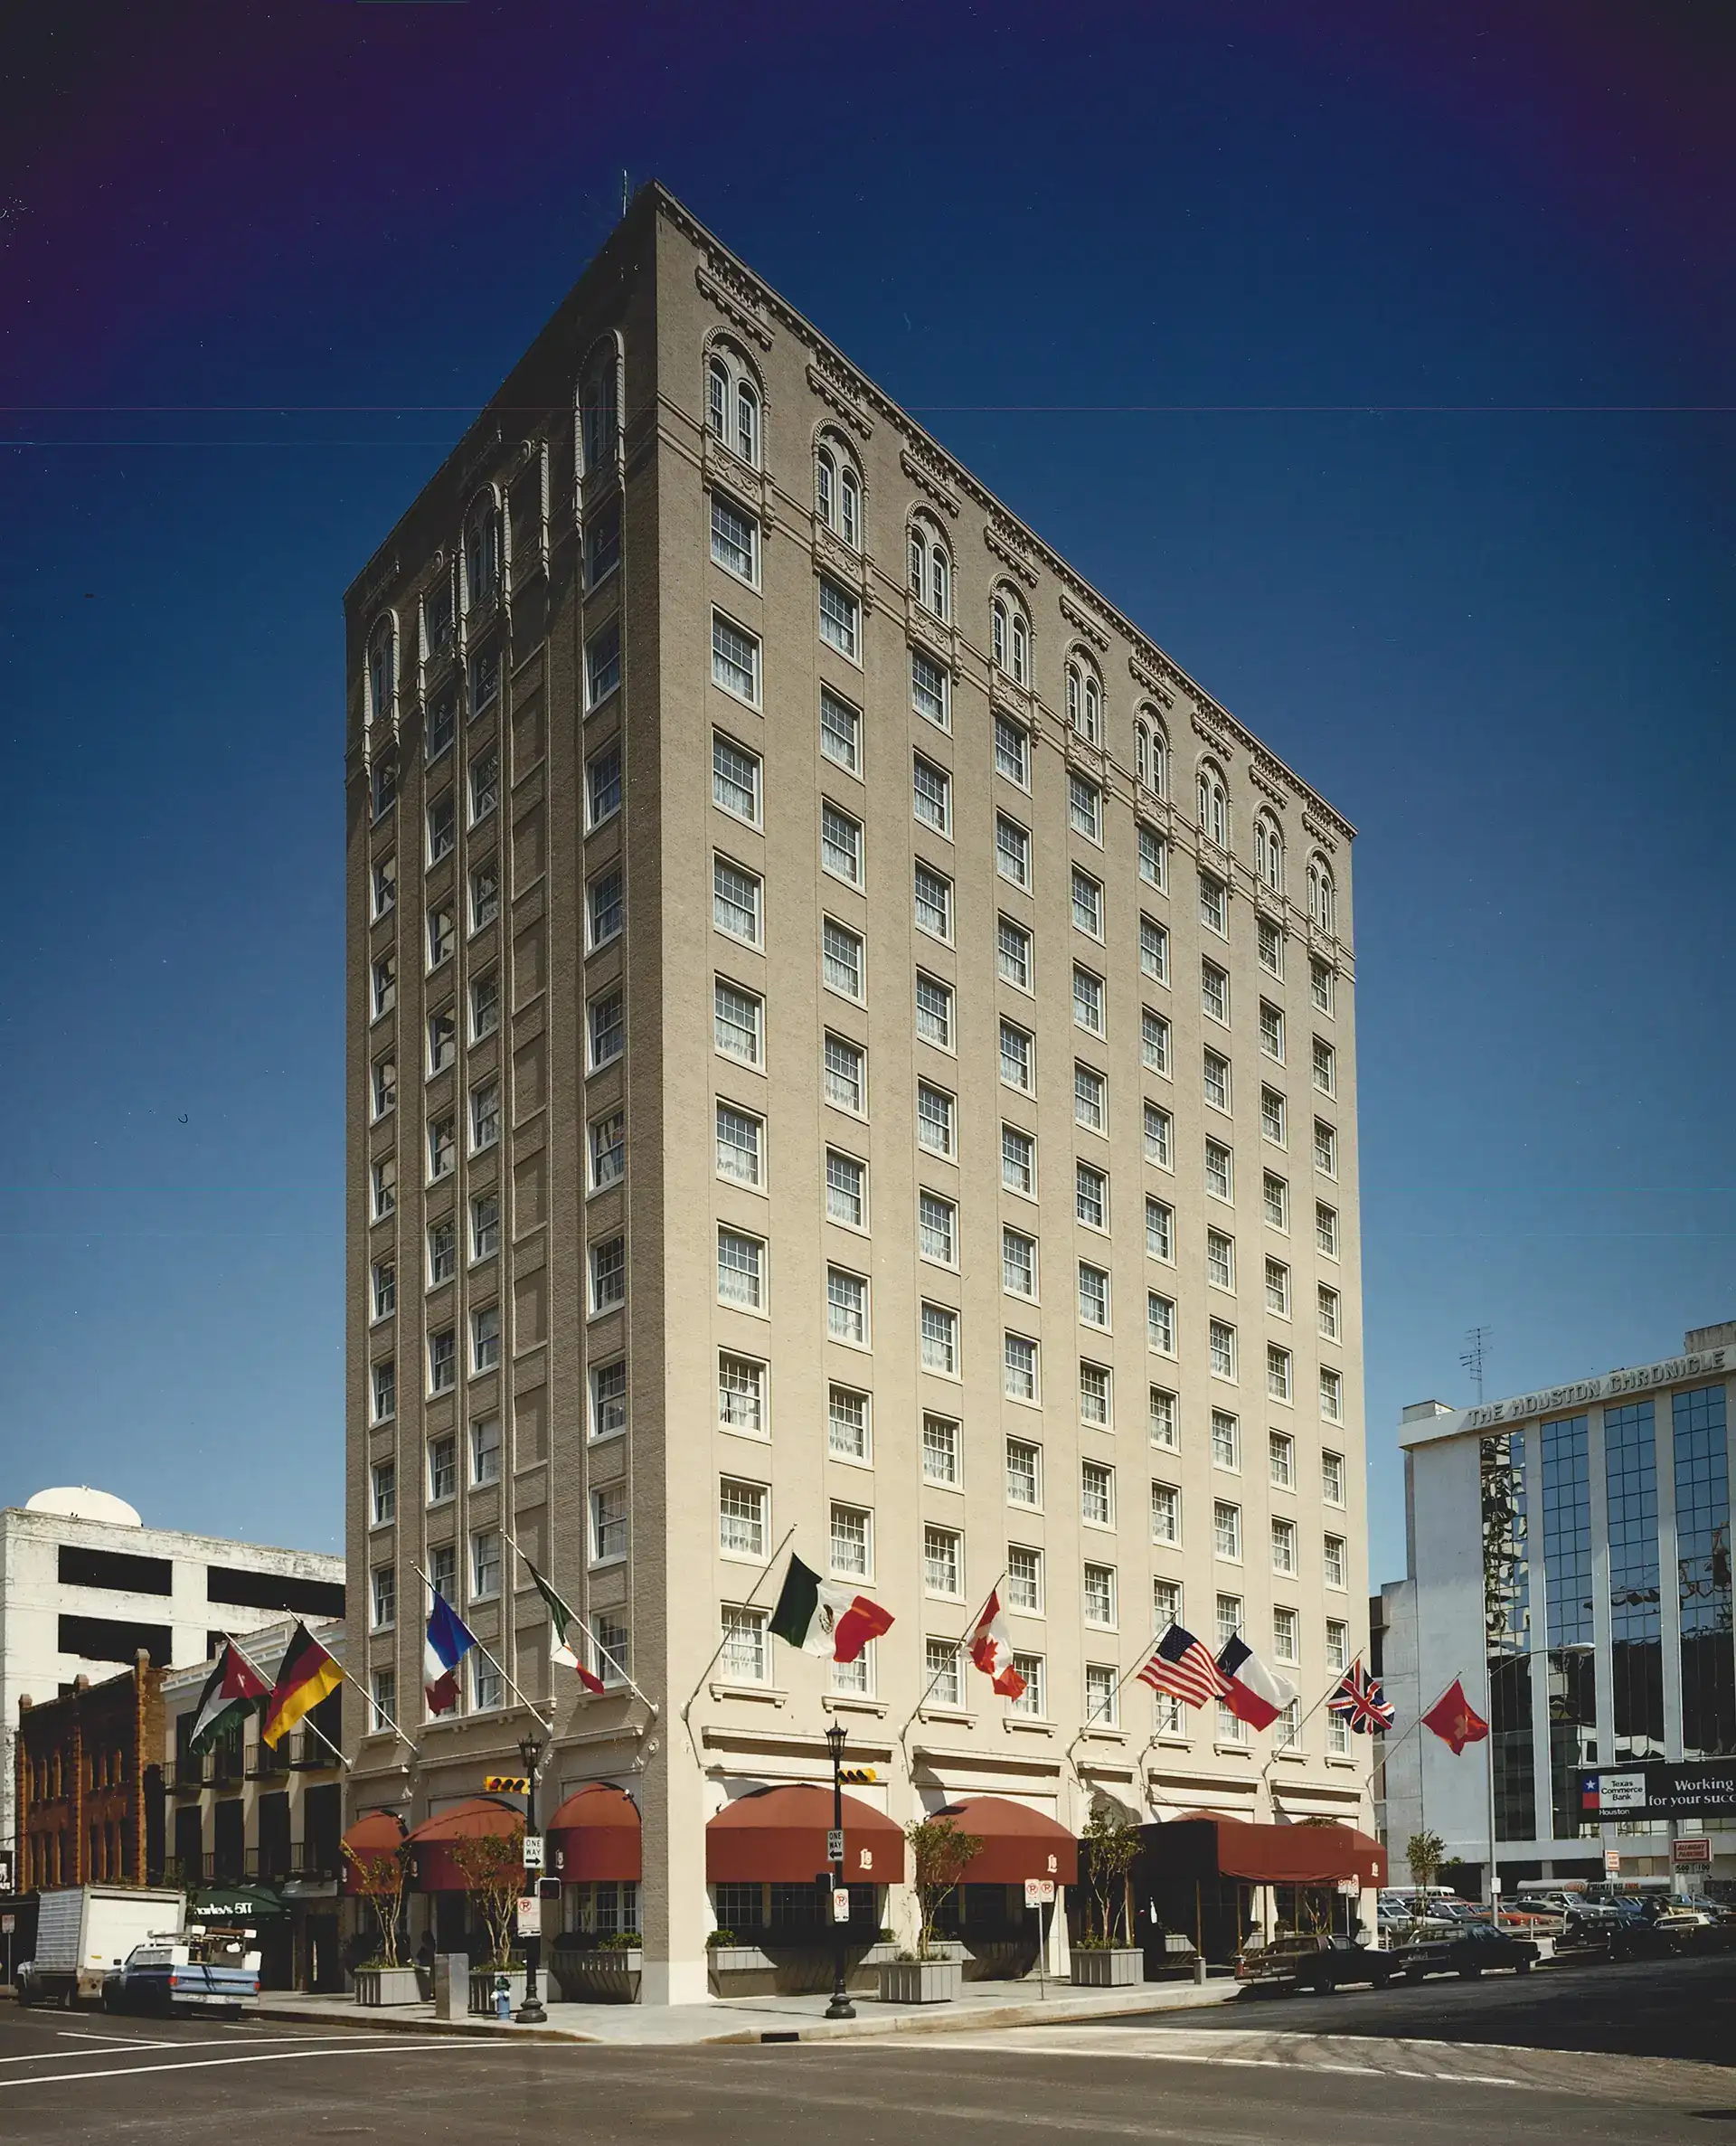 The Lancaster Hotel